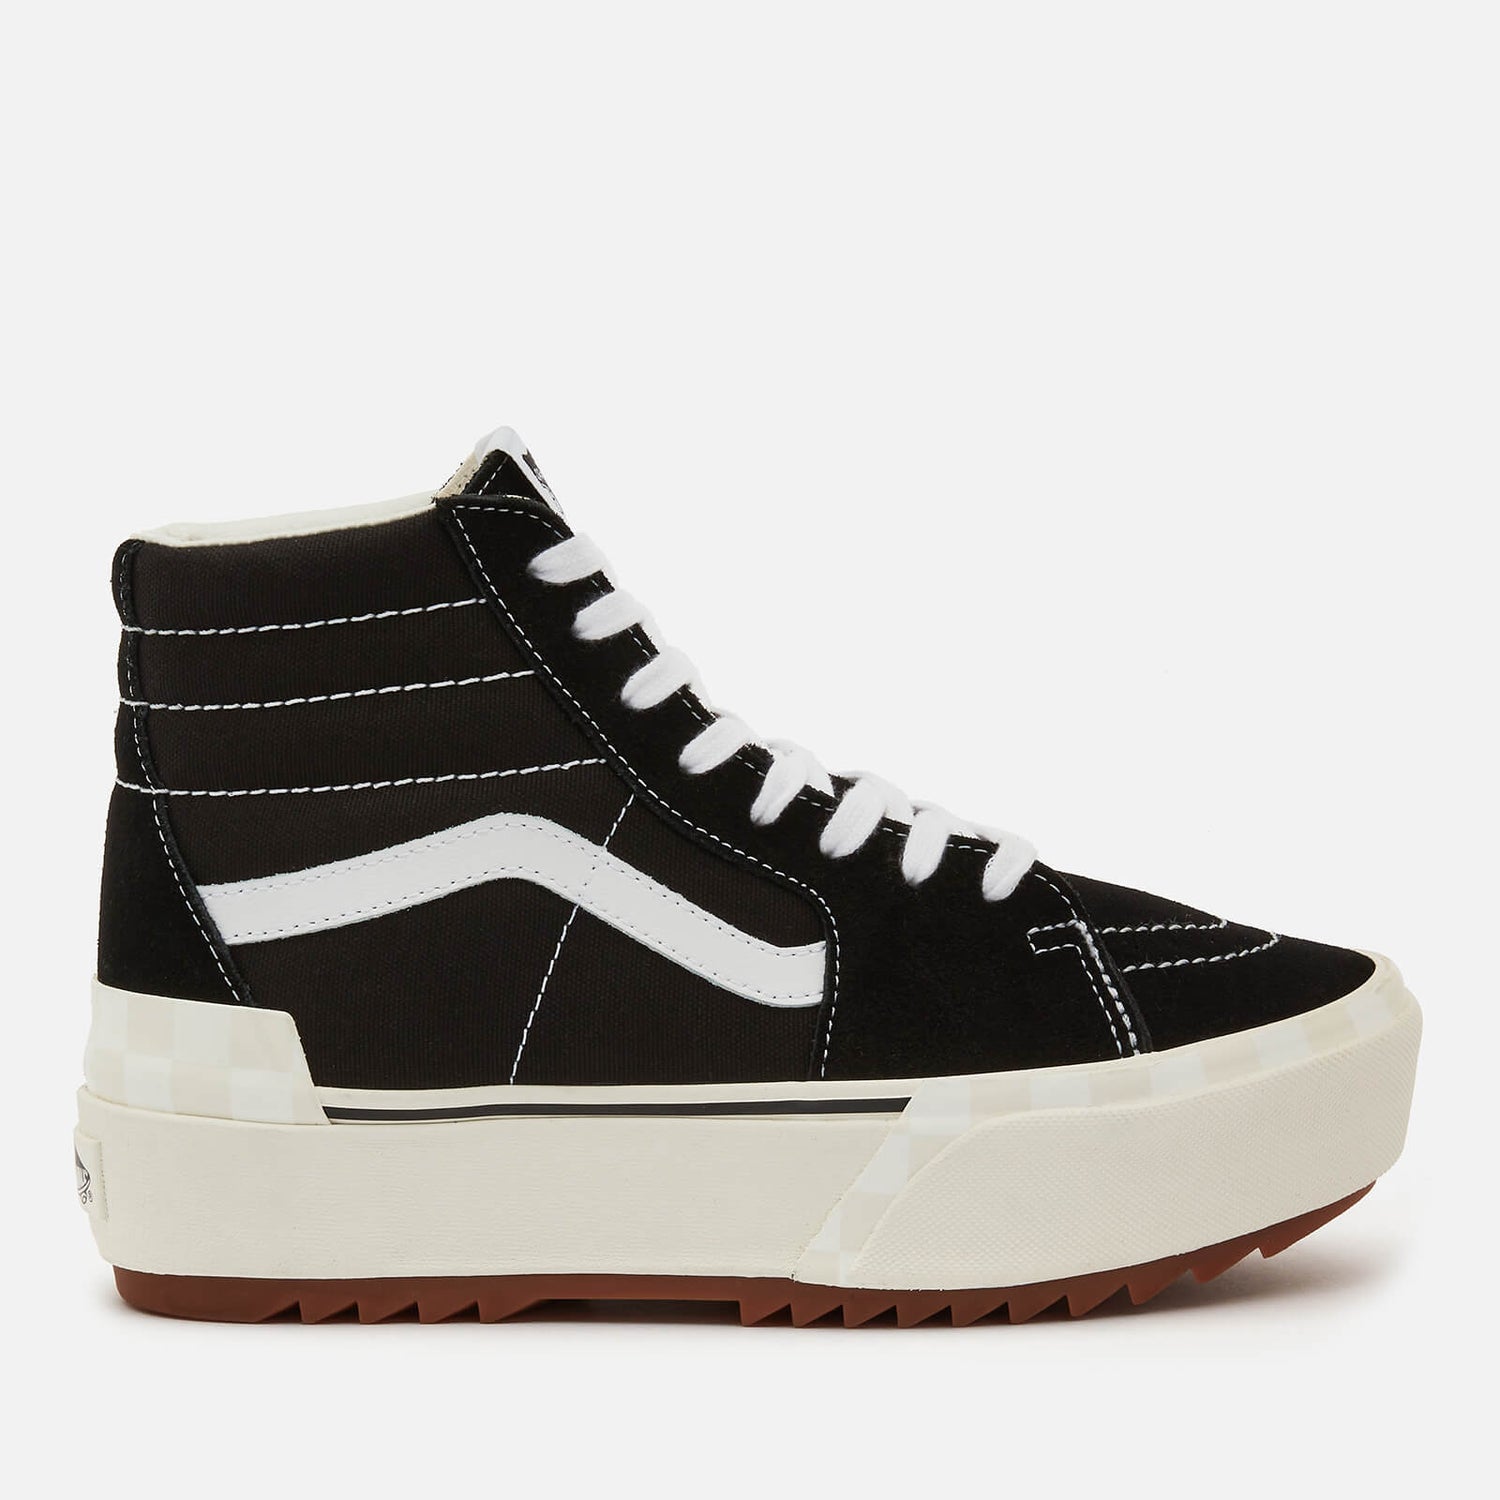 Vans Women's Sk8-Hi Stacked Trainers - Black | FREE UK Delivery | Allsole